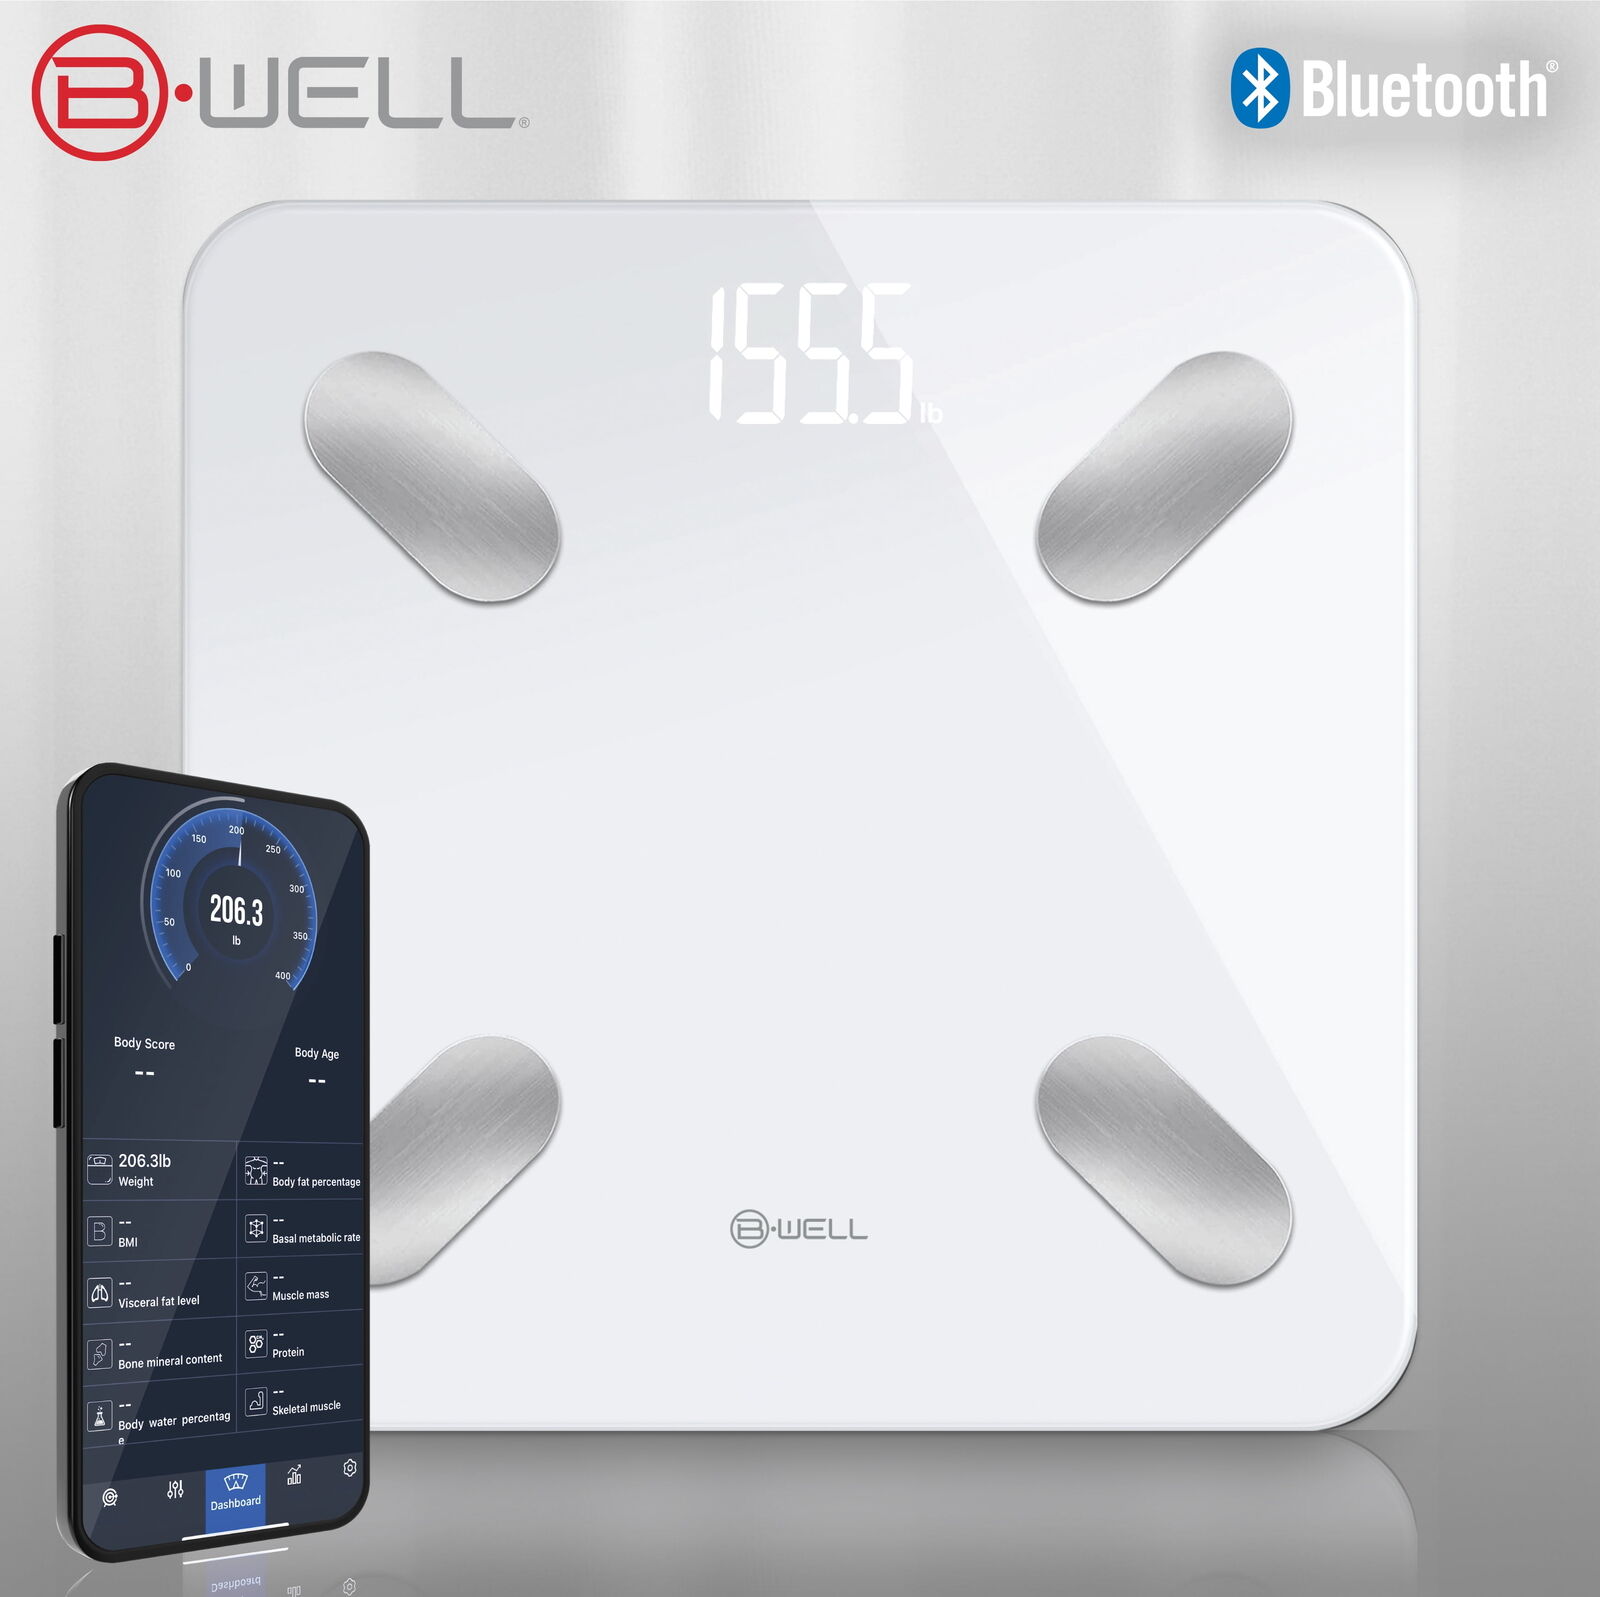 Bluetooth Smart Scale with App – Track Weight, BMI, Body Fat & More